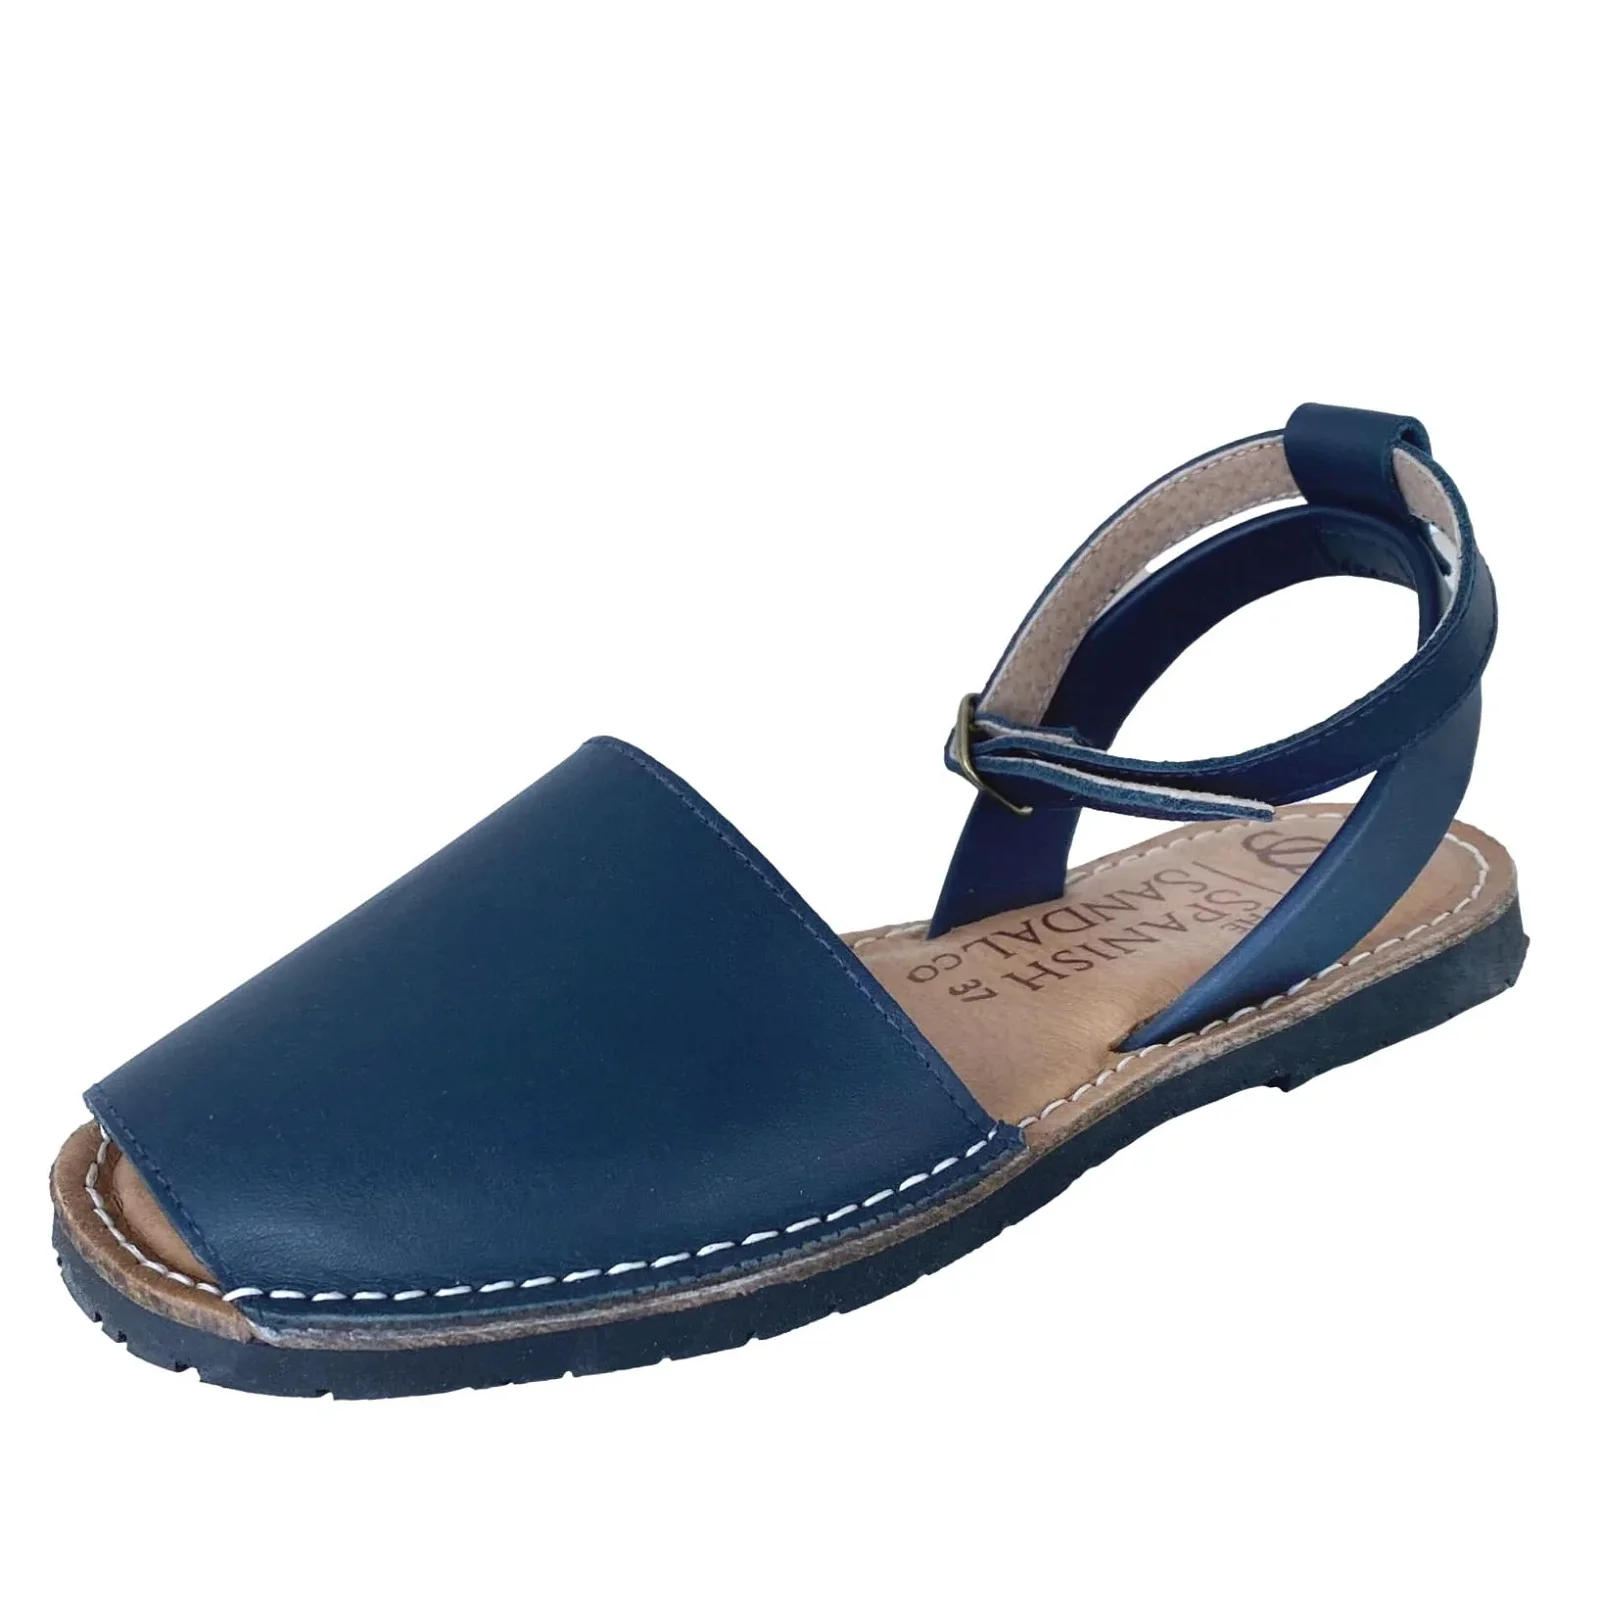 Image of Navy blue sandals with strap